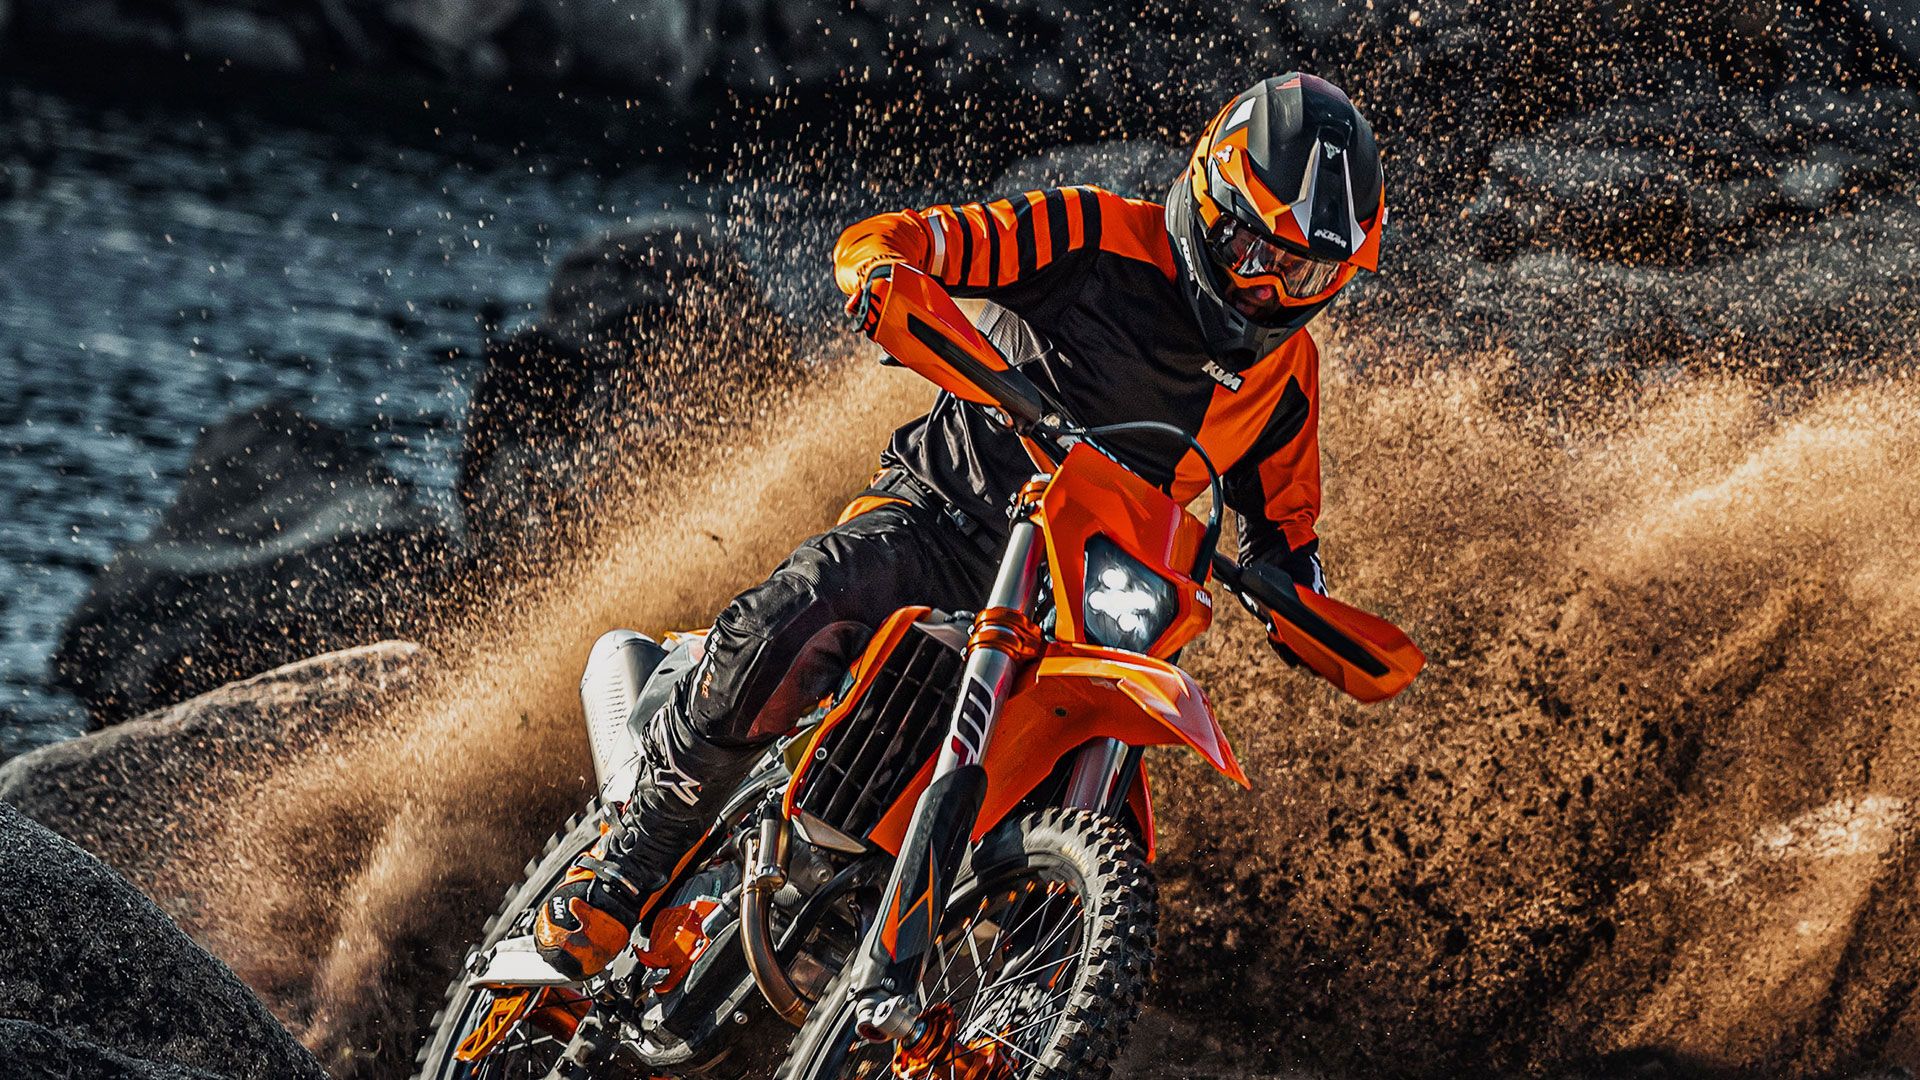 crushing the dirt trail with a KTM 500 EXC-F